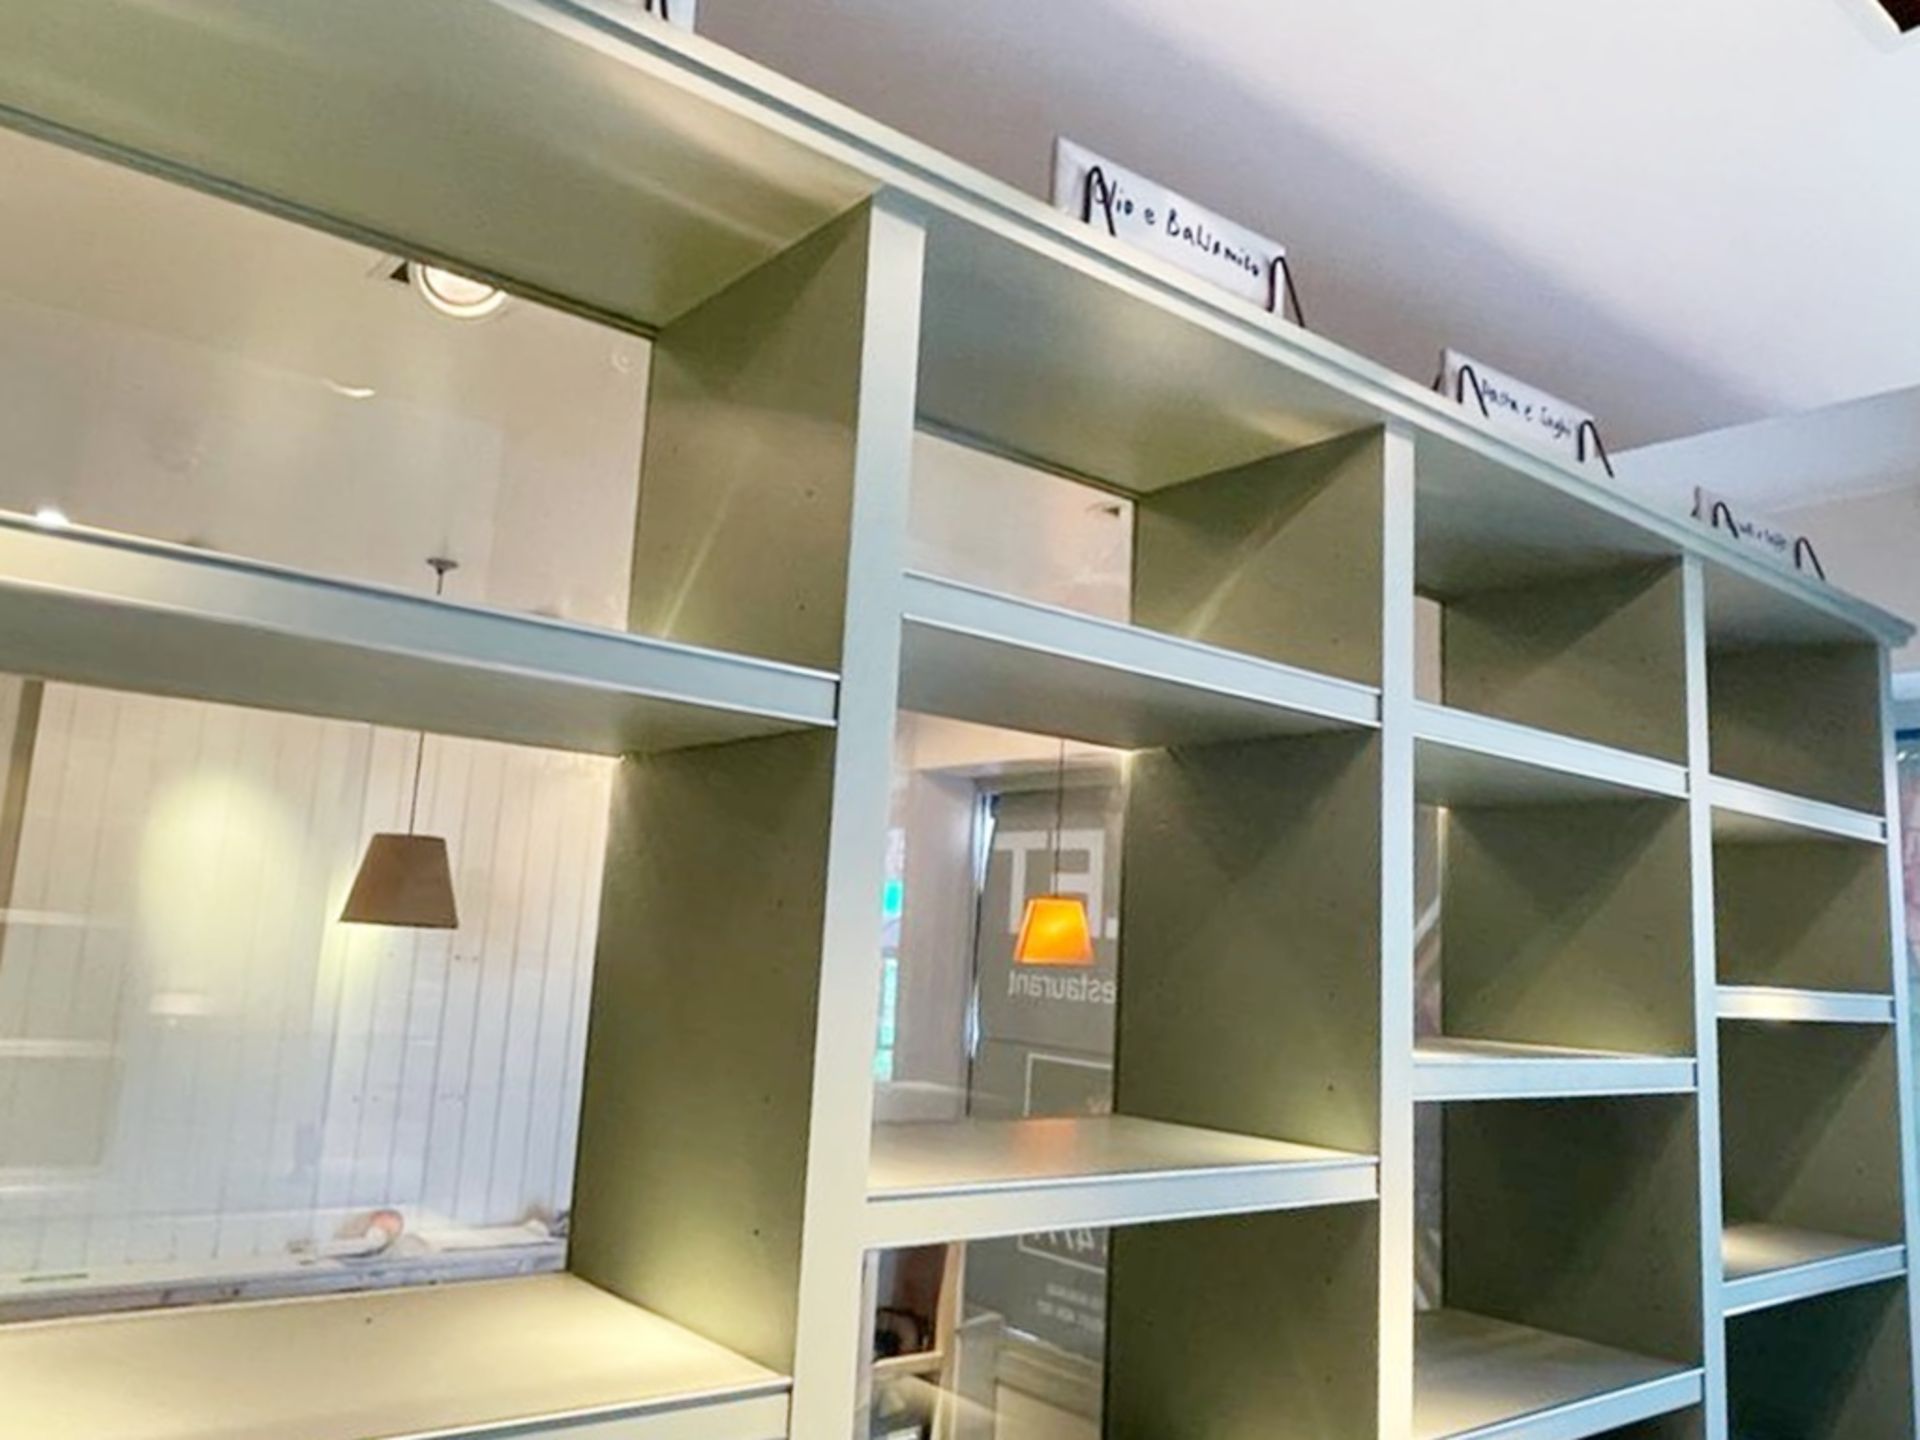 1 x Bespoke Display Island / Partition With Display Shelves, Olive Green Finish, Marble Worktop - Image 11 of 16